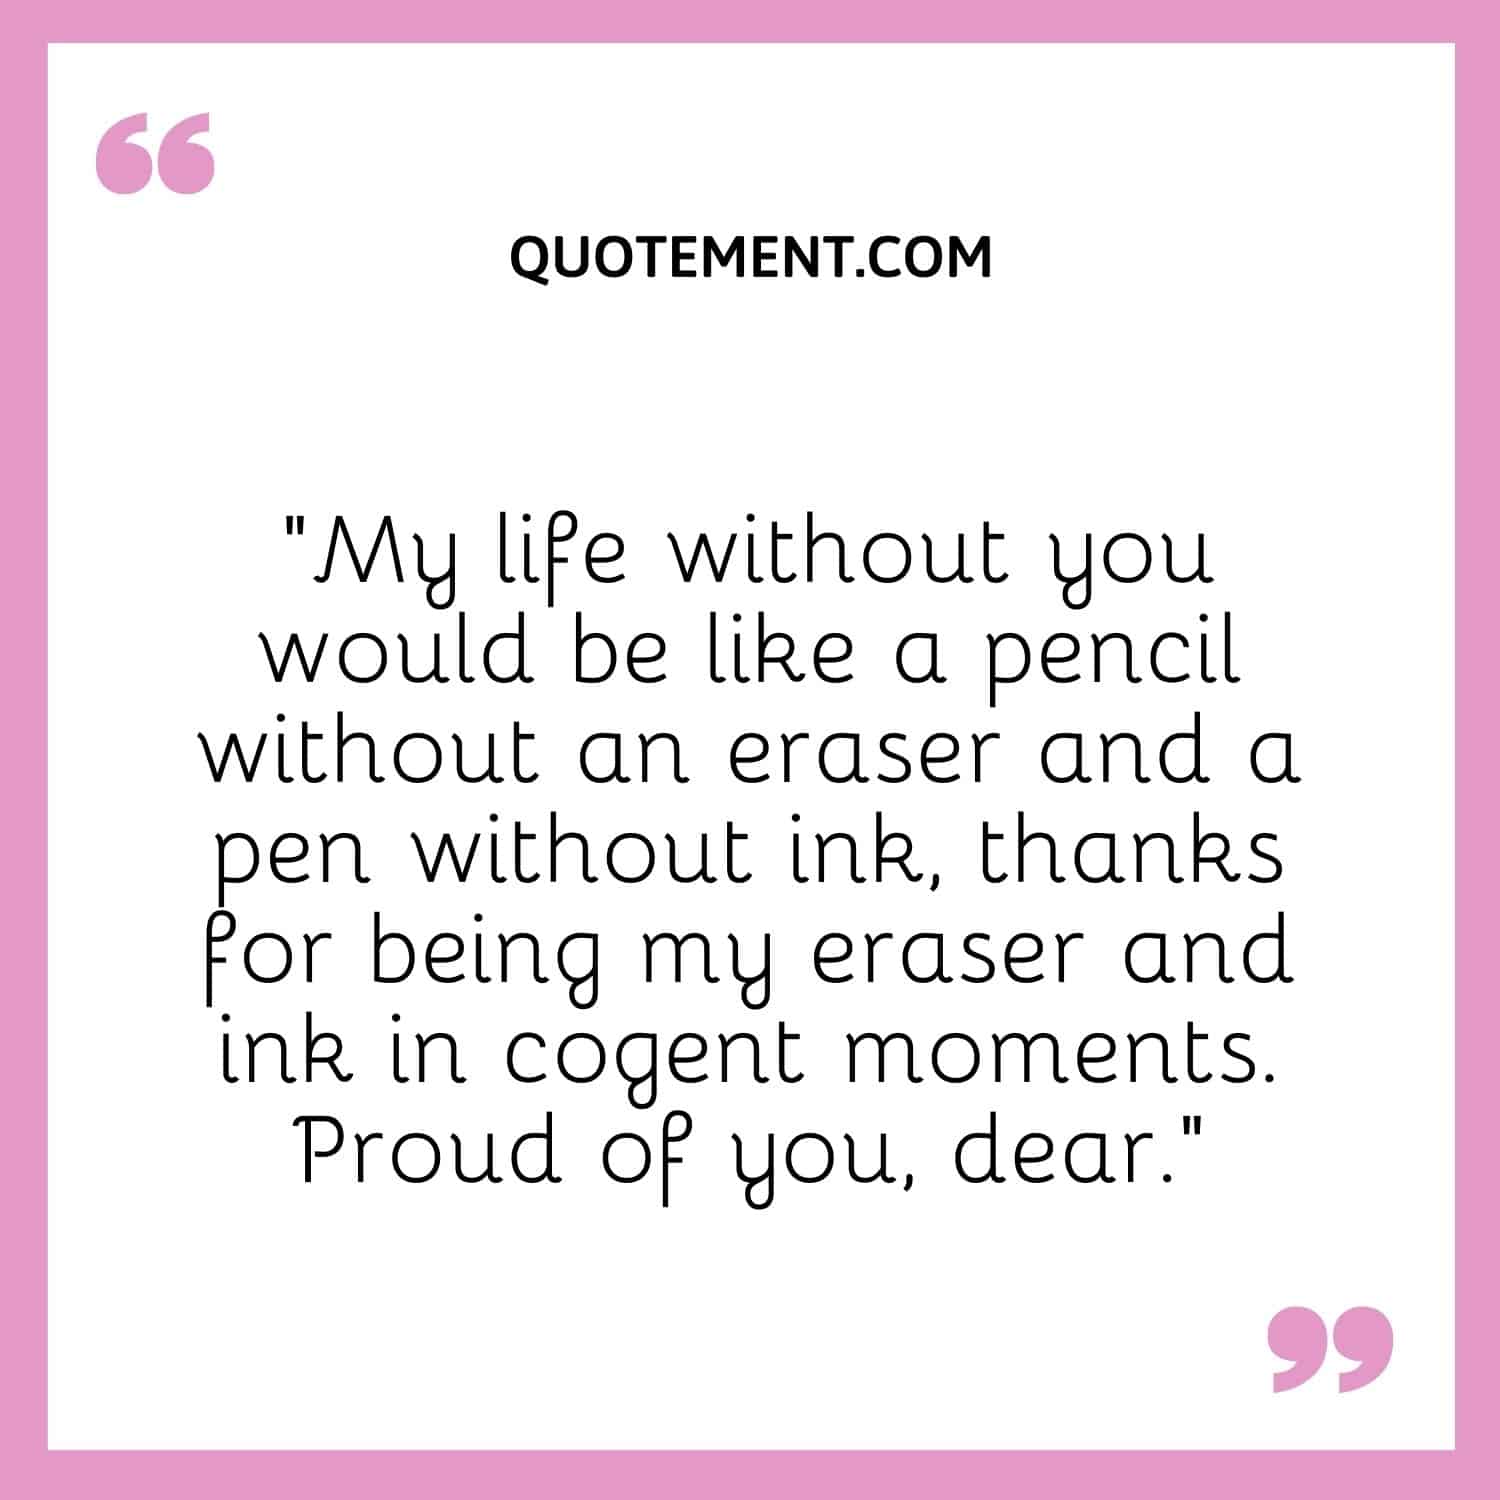 “My life without you would be like a pencil without an eraser and a pen without ink, thanks for being my eraser and ink in cogent moments. Proud of you, dear.”